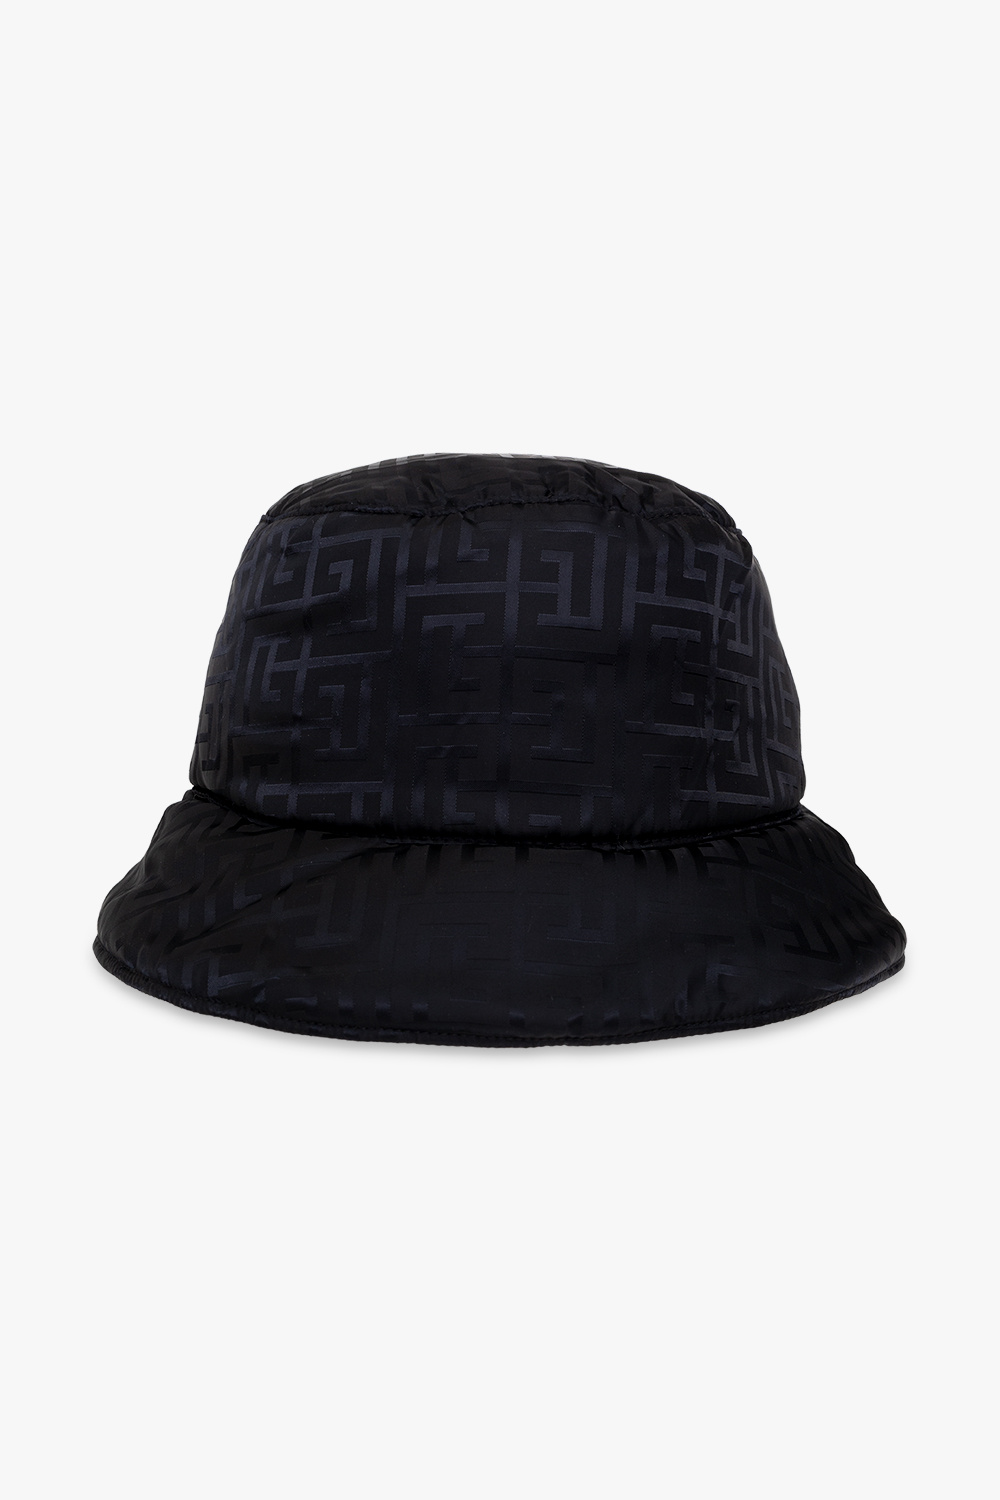 Balmain The Marc Jacobs Kids Boys knitted hats for Kids